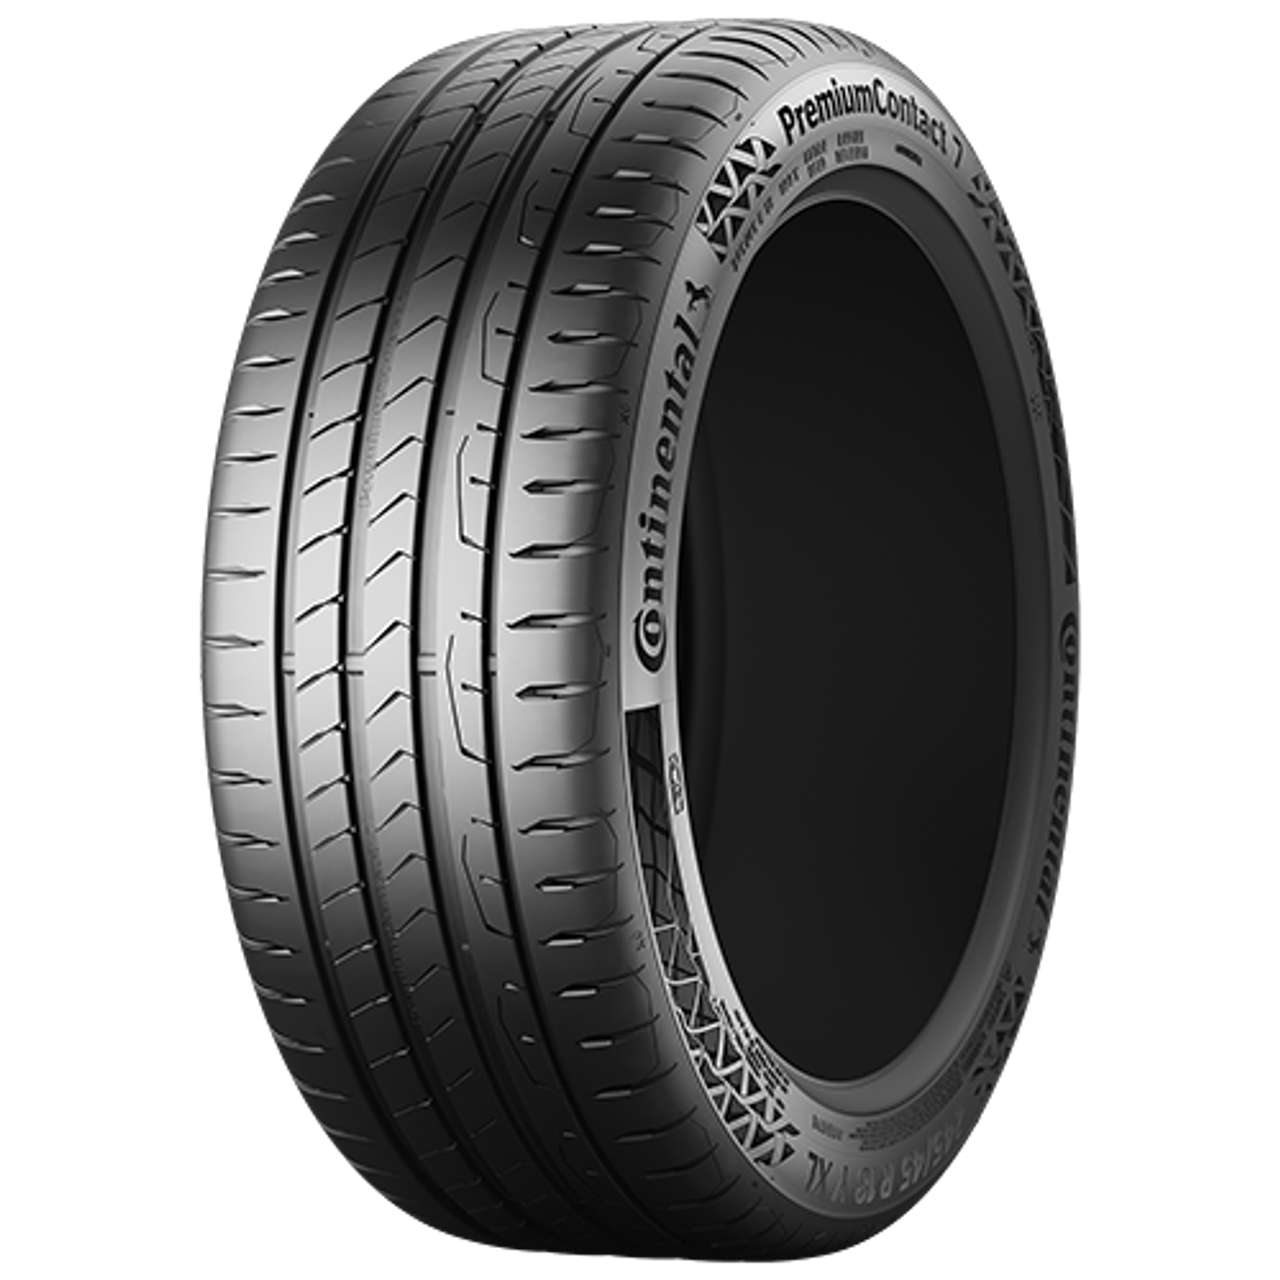 CONTINENTAL PREMIUMCONTACT 7 (EVc) 215/50R17 95Y FR BSW